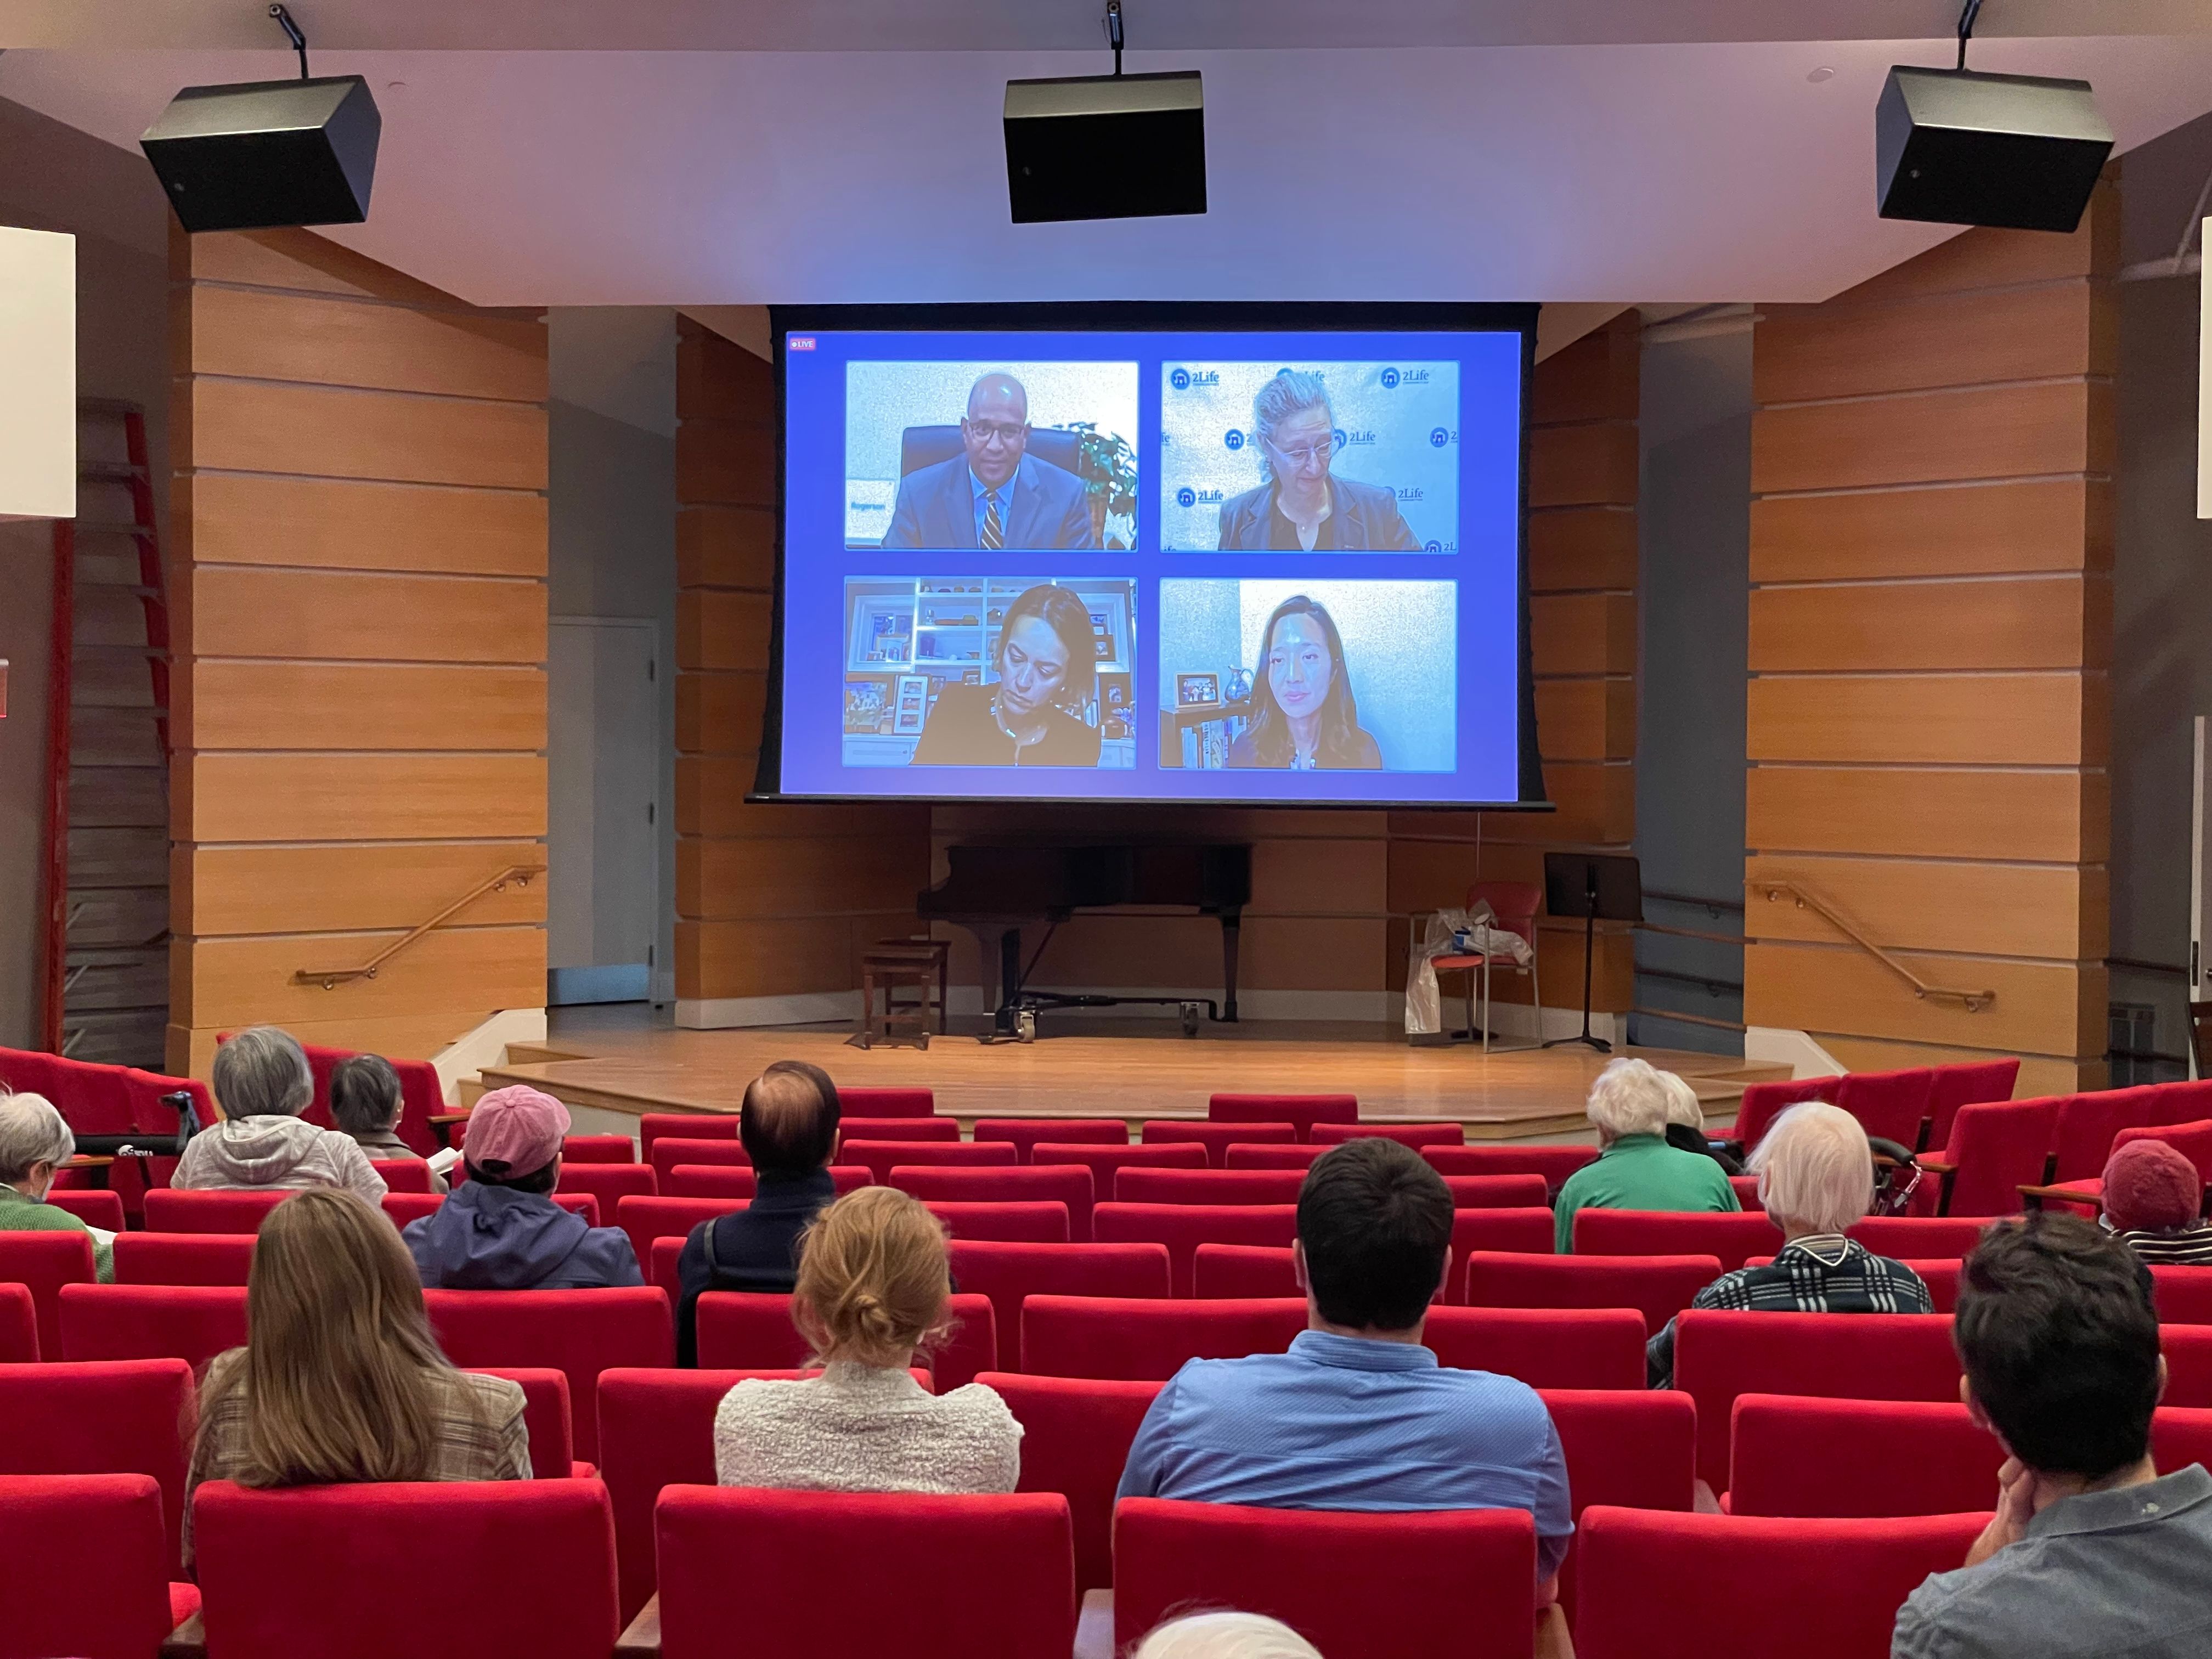 Walter Ramos, Amy Schectman, Annissa Essaibi-George, and Michelle Wu on screen in 2Life's Brighton Campus auditorium during the live broadcast of Candidate Forum: A Vision for Boston Seniors